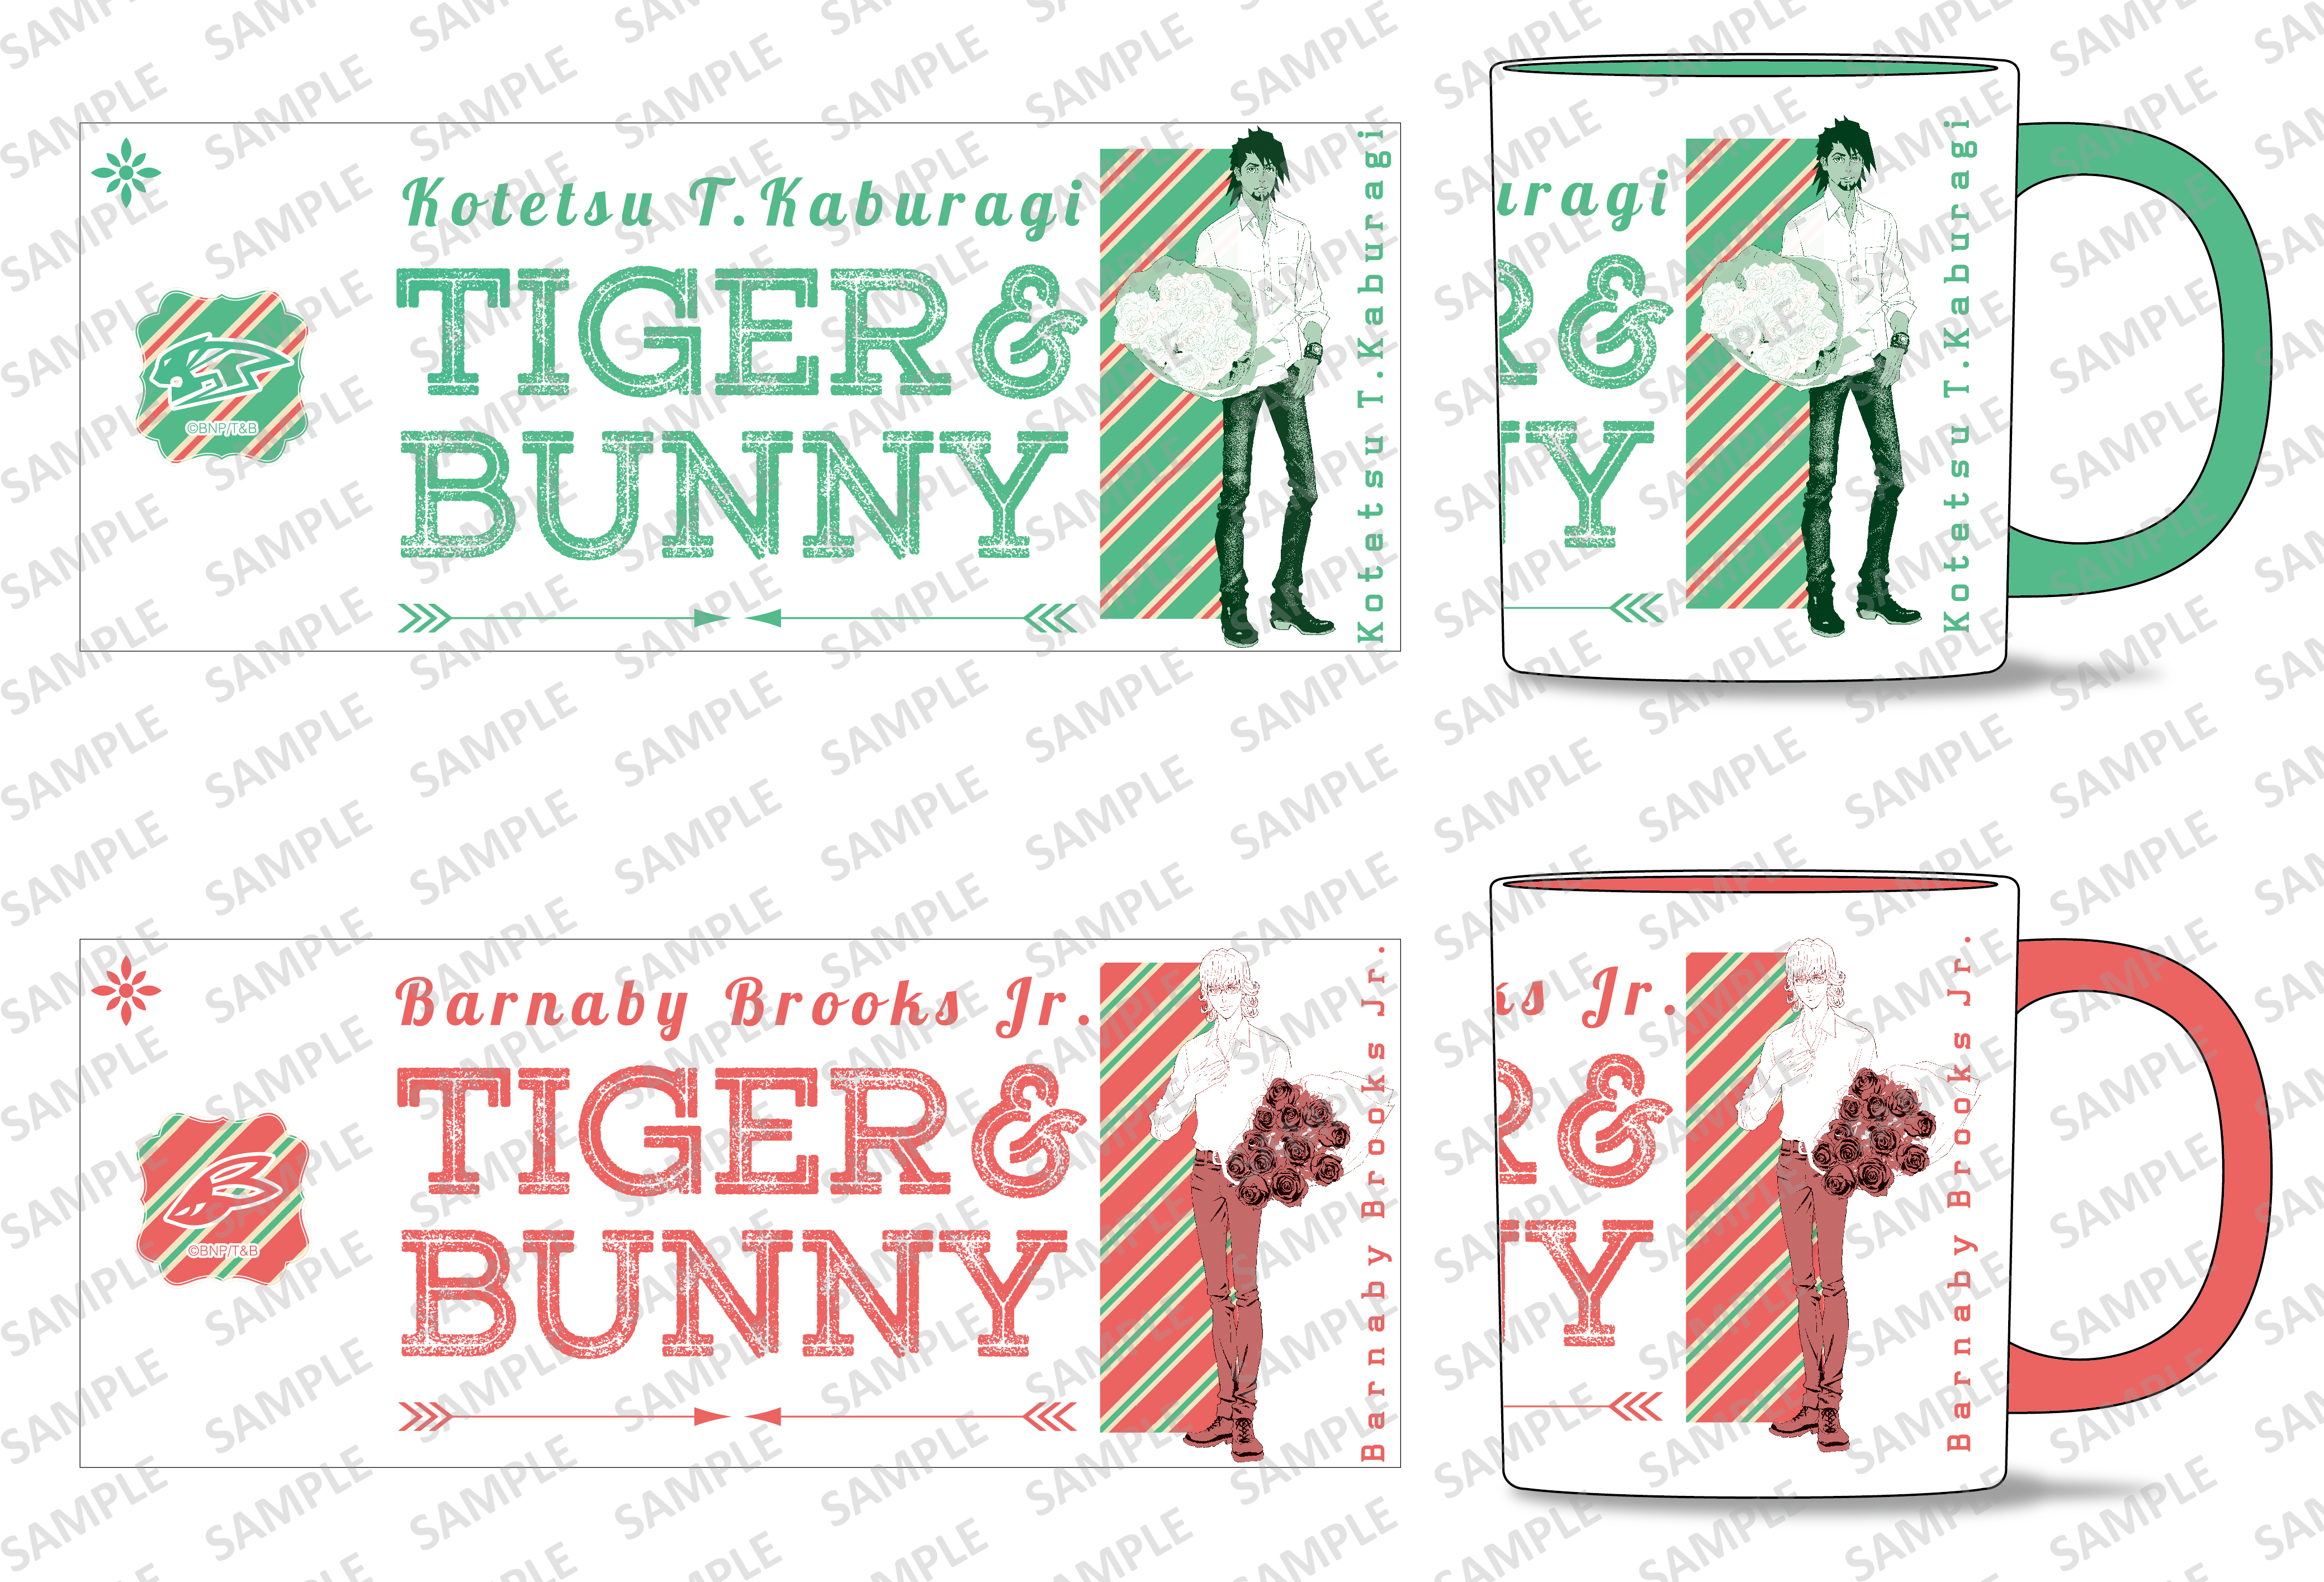 「TIGER & BUNNY」×「キャラアニ.com」ONLINE POPUP EVENTの開催が決定！